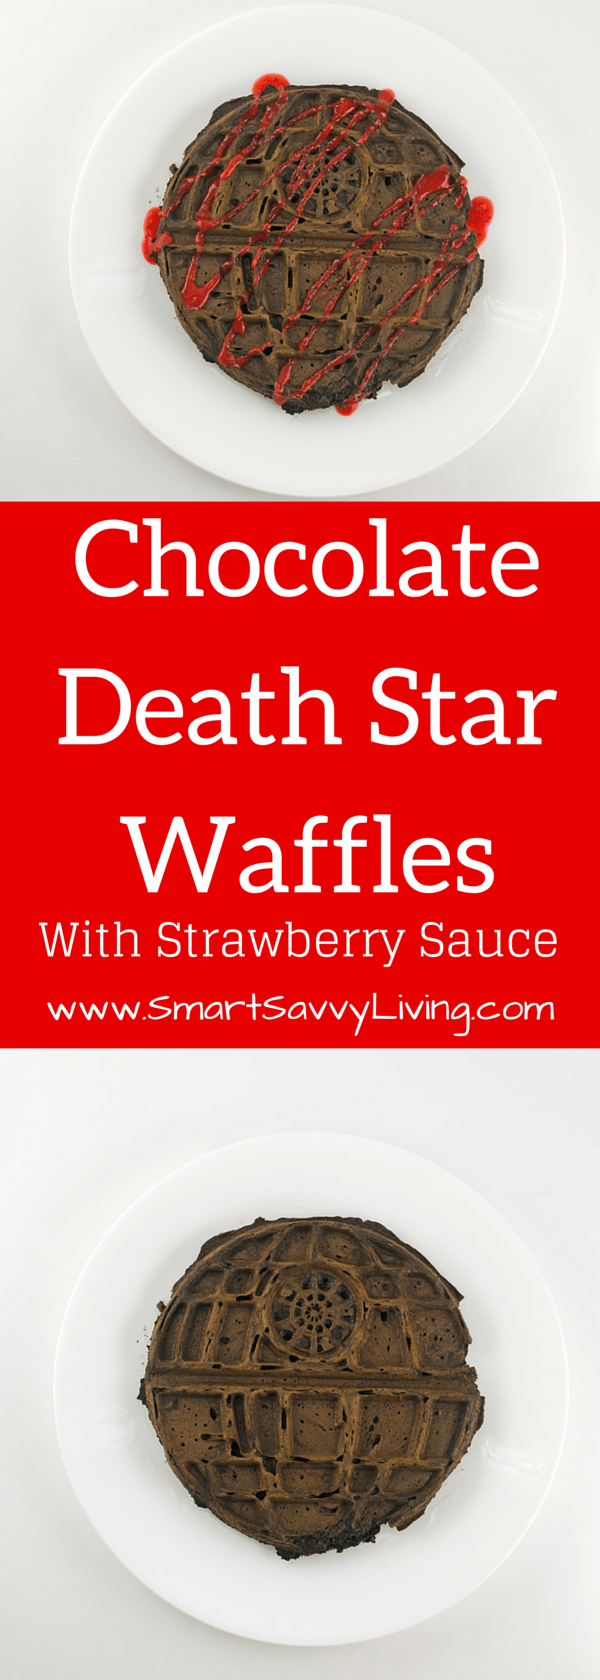 Chocolate Death Star Waffles with Strawberry Sauce Recipe